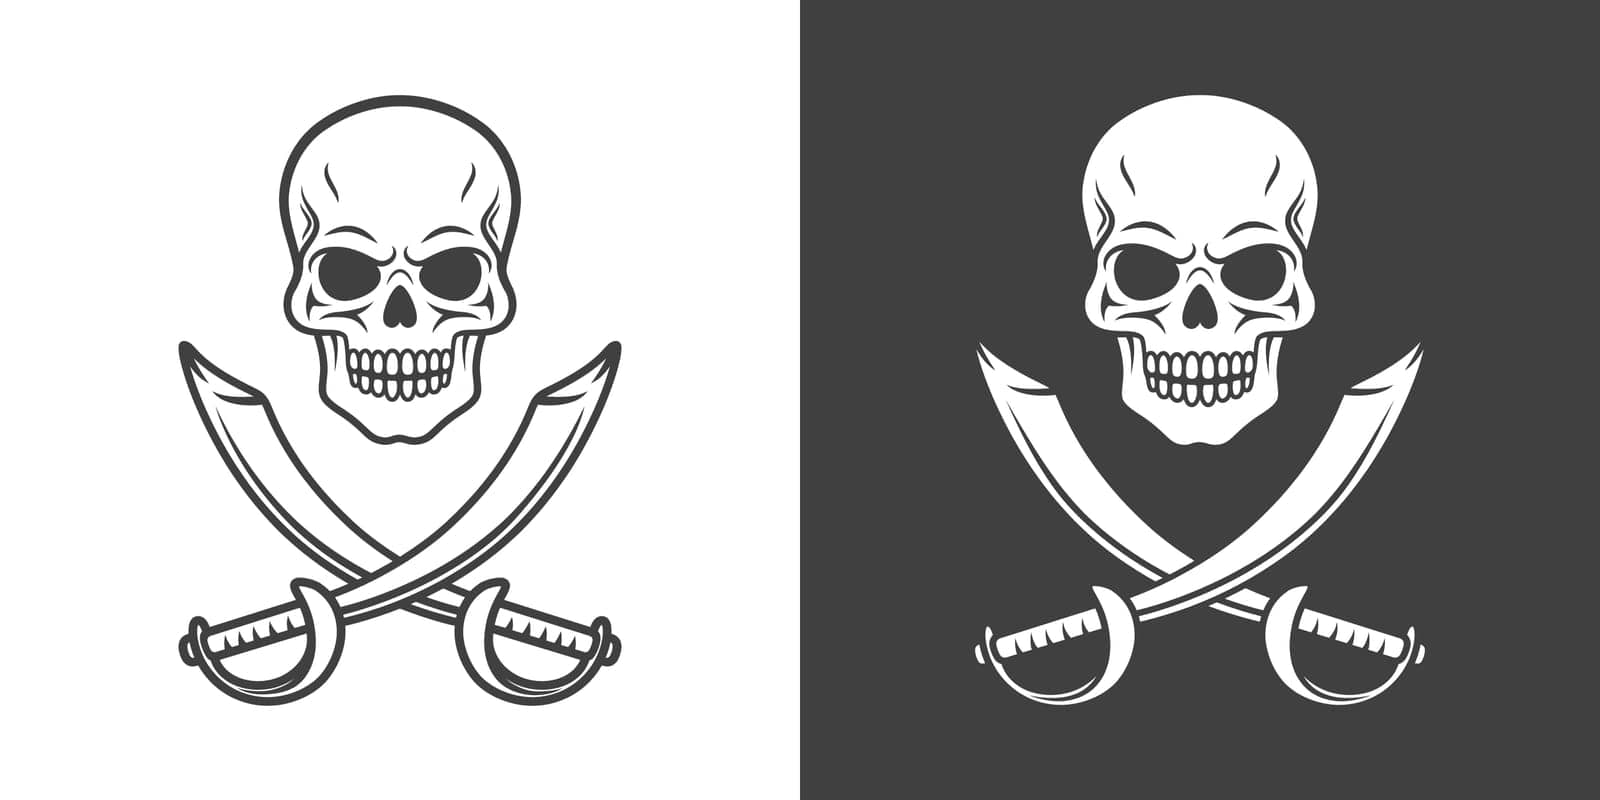 Vector Black and White Skull and Crosshairs Sabers Icon Set Closeup Isolated. Skulls Collection with Outline, Cut Out Style in Front View. Hand Drawn Skull Head Design Template by Gomolach